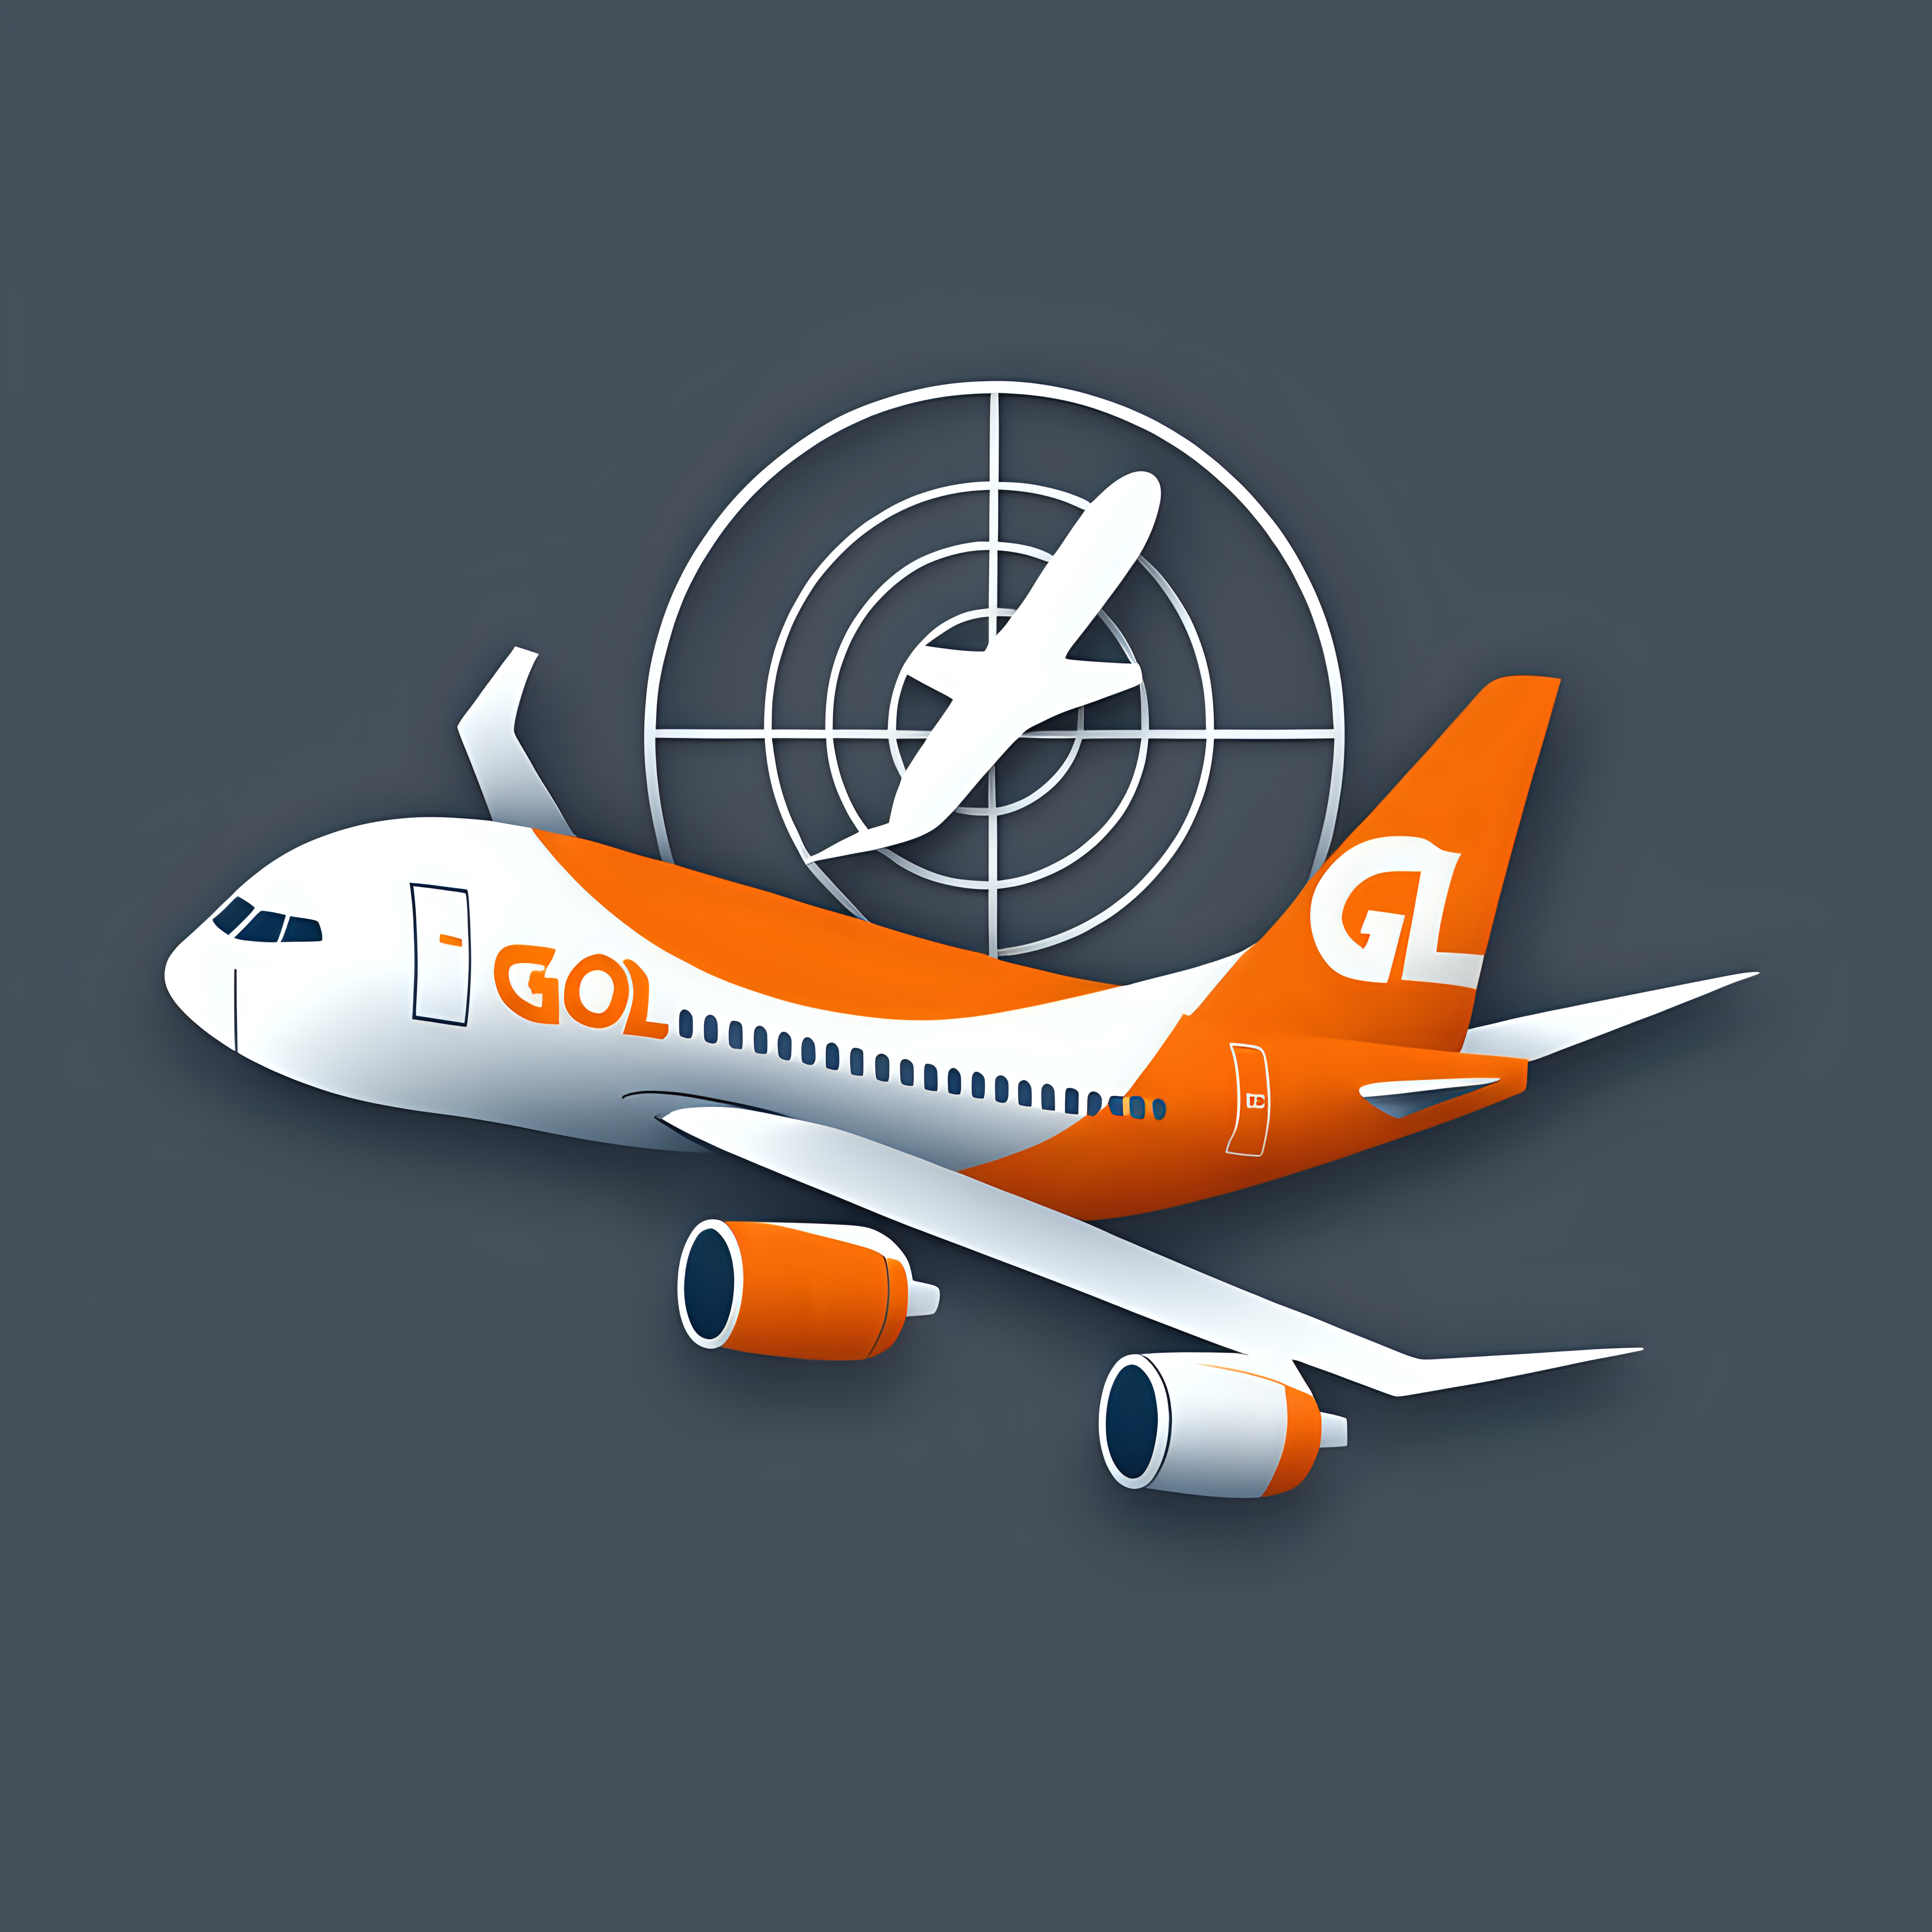 Design an icon for the GOL Airlines aircraft